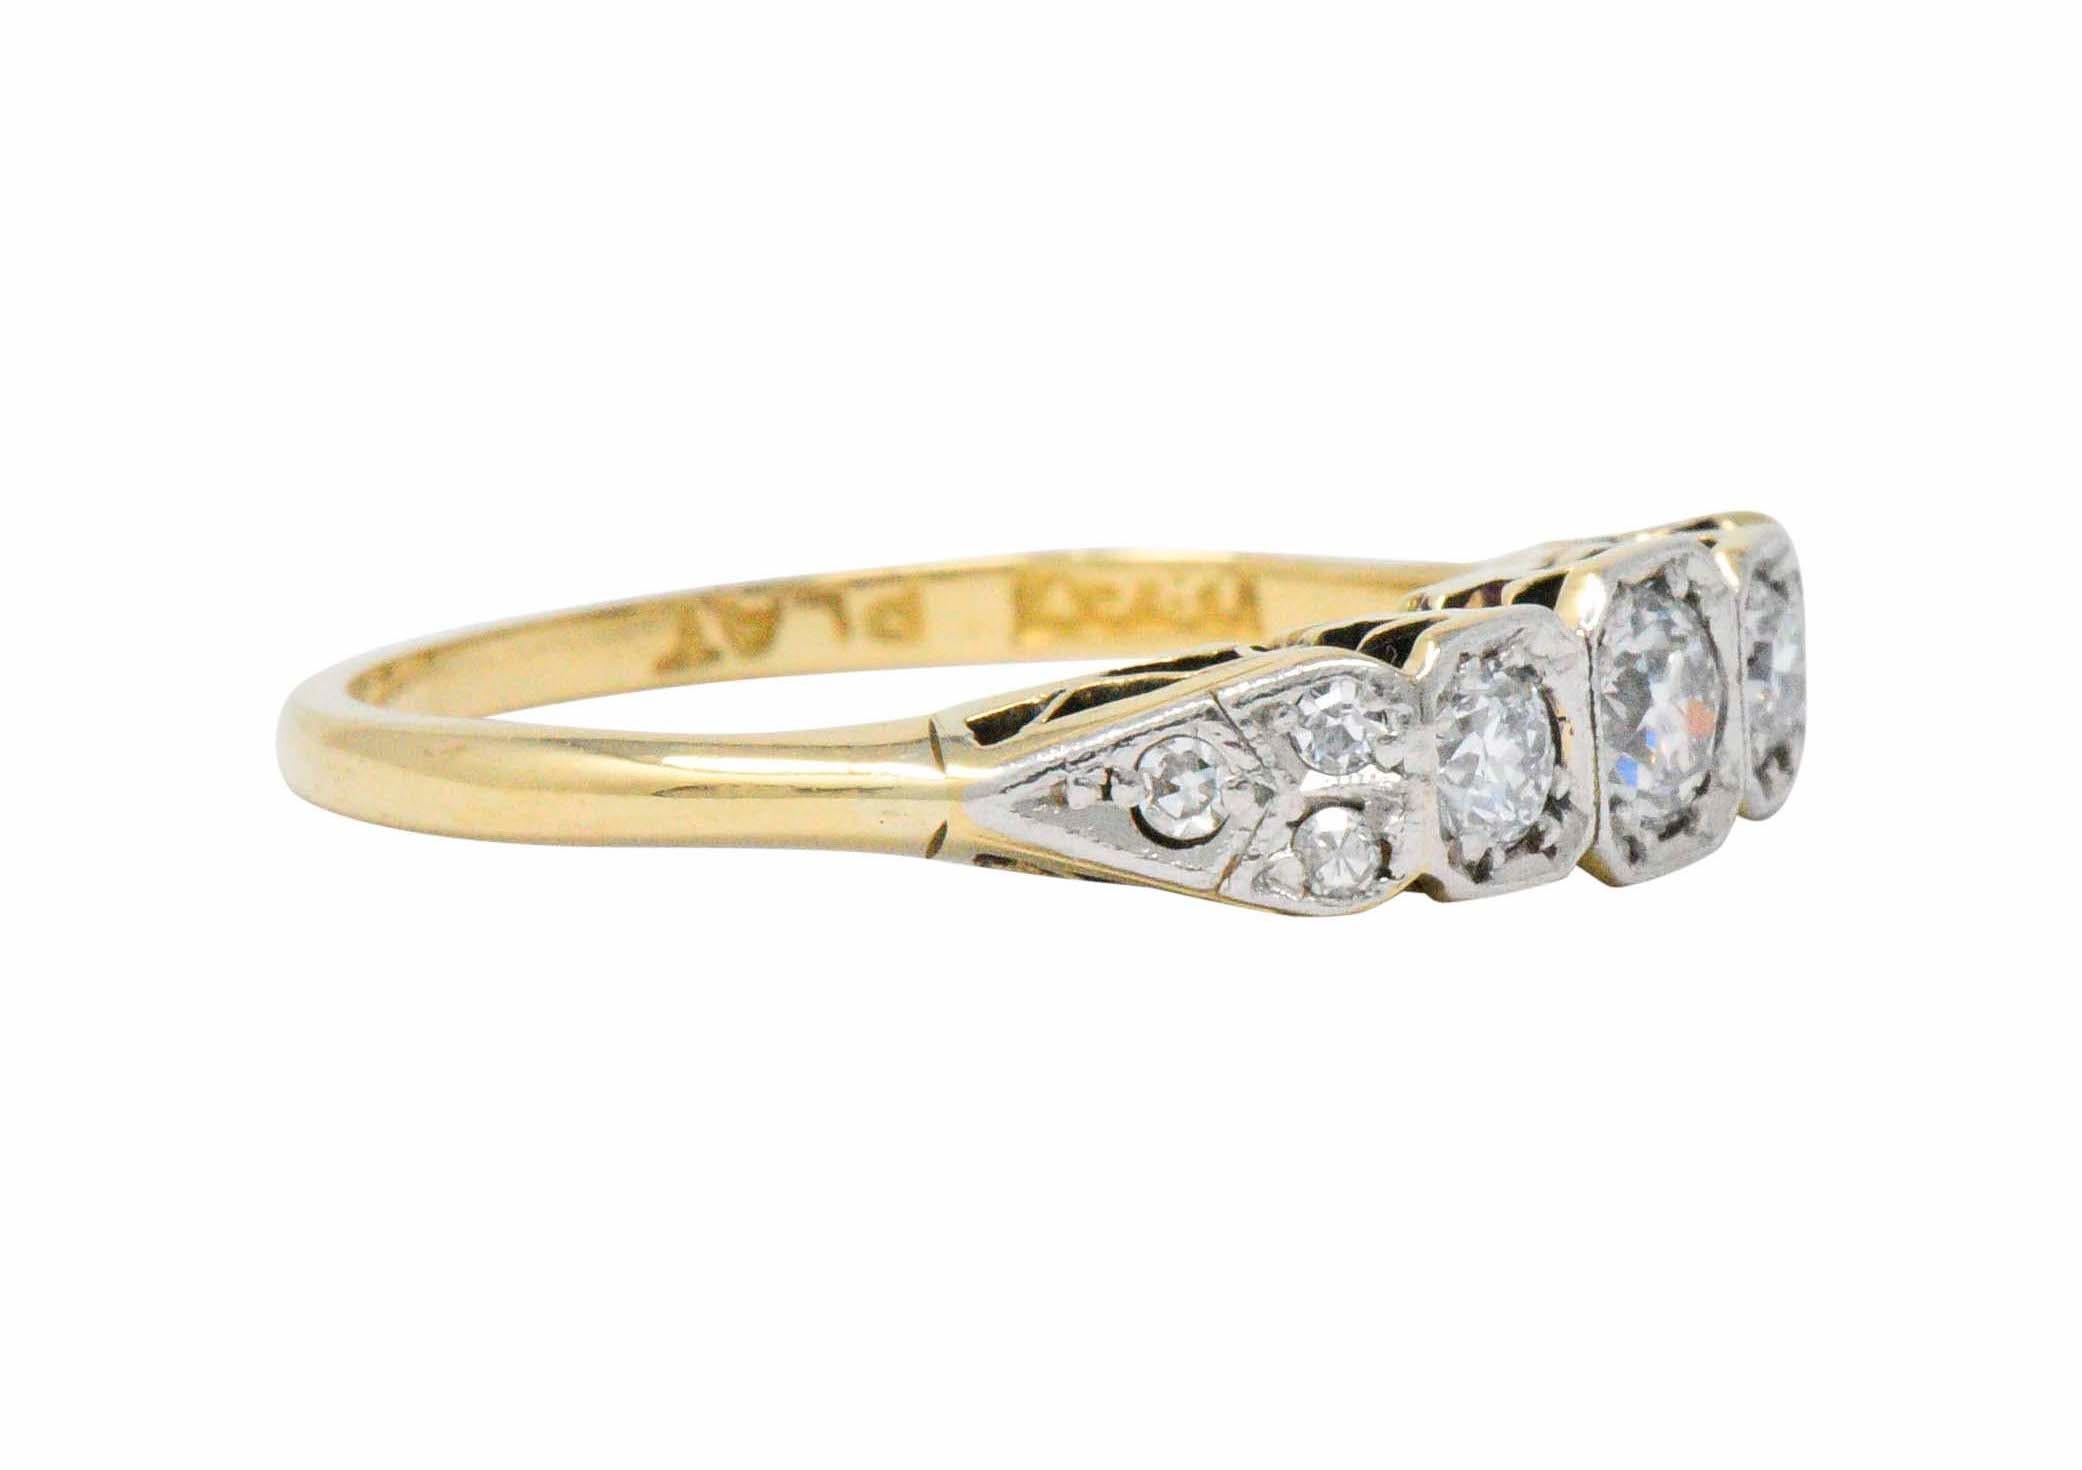 Aesthetic Movement Saunders Late Victorian 0.40 CTW Diamond And Platinum-Topped 18 Karat Gold Ring